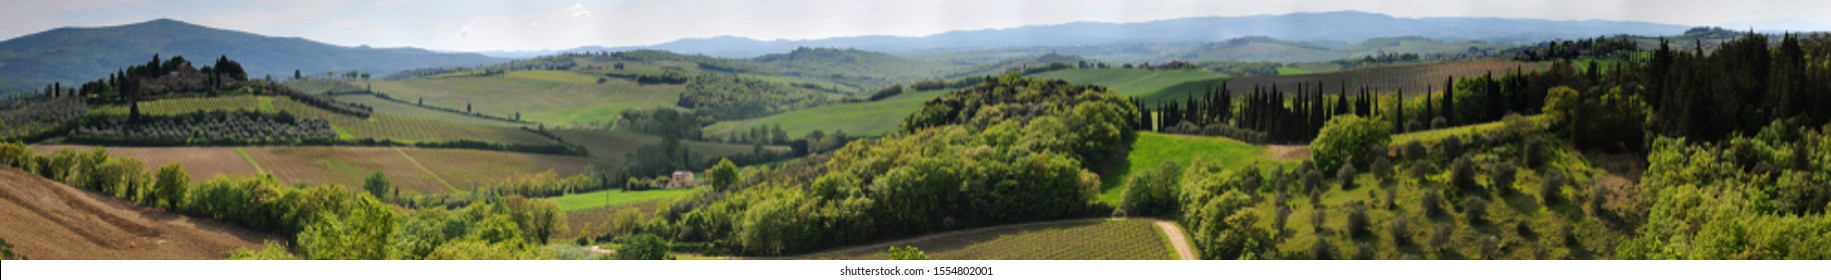 Beautiful Tuscan landscape with cypress trees, vineyards and olive trees near Siena. Italy